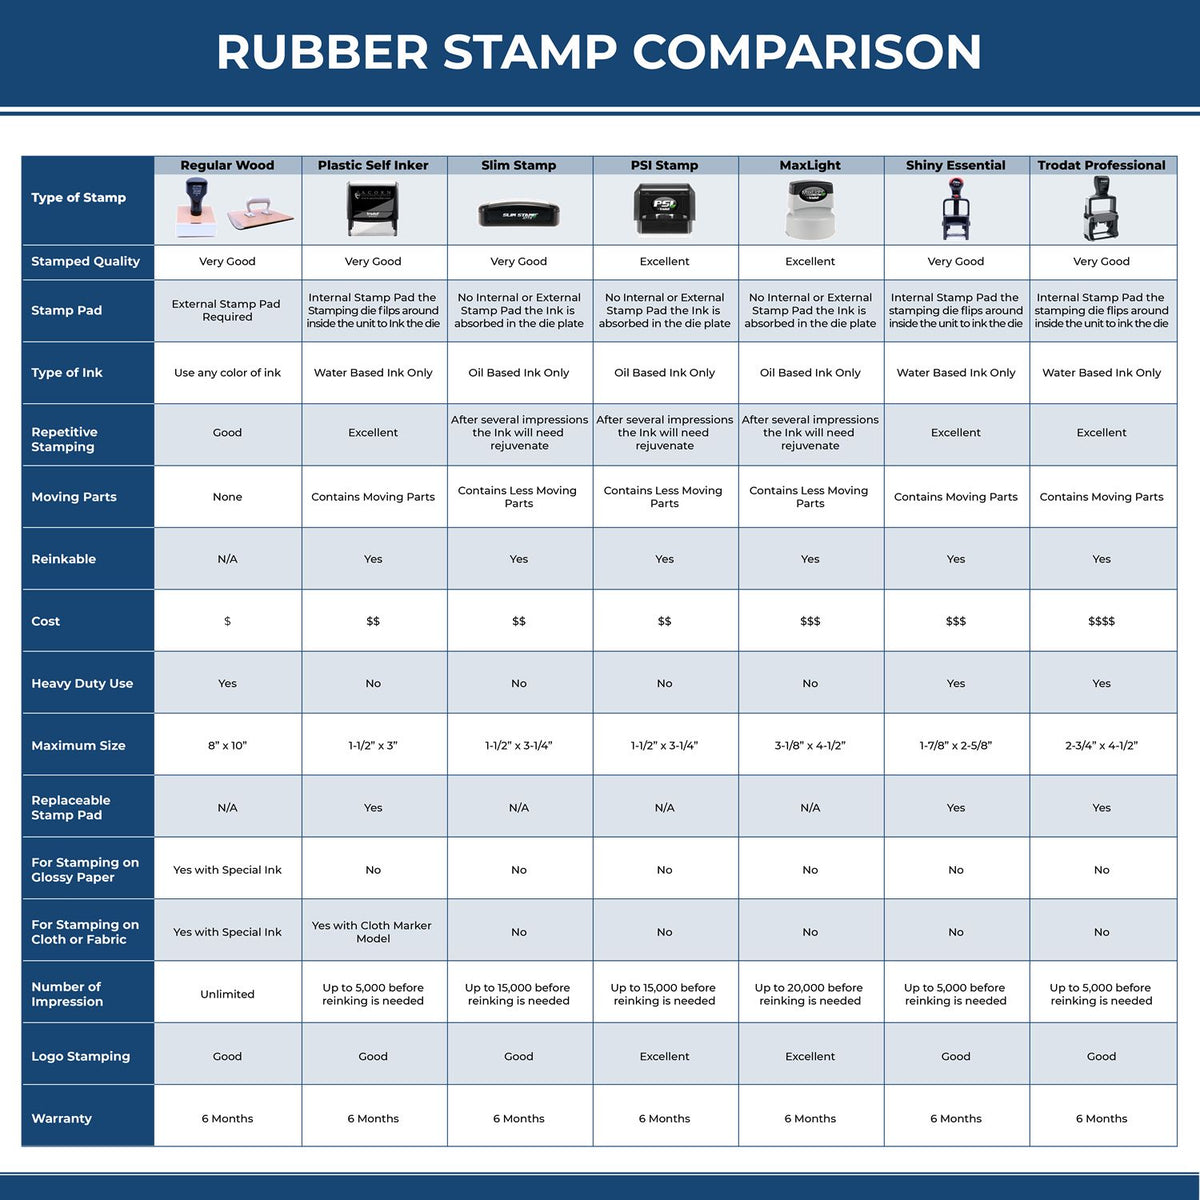 Large Self-Inking Review and Sign Stamp 5604S Rubber Stamp Comparison